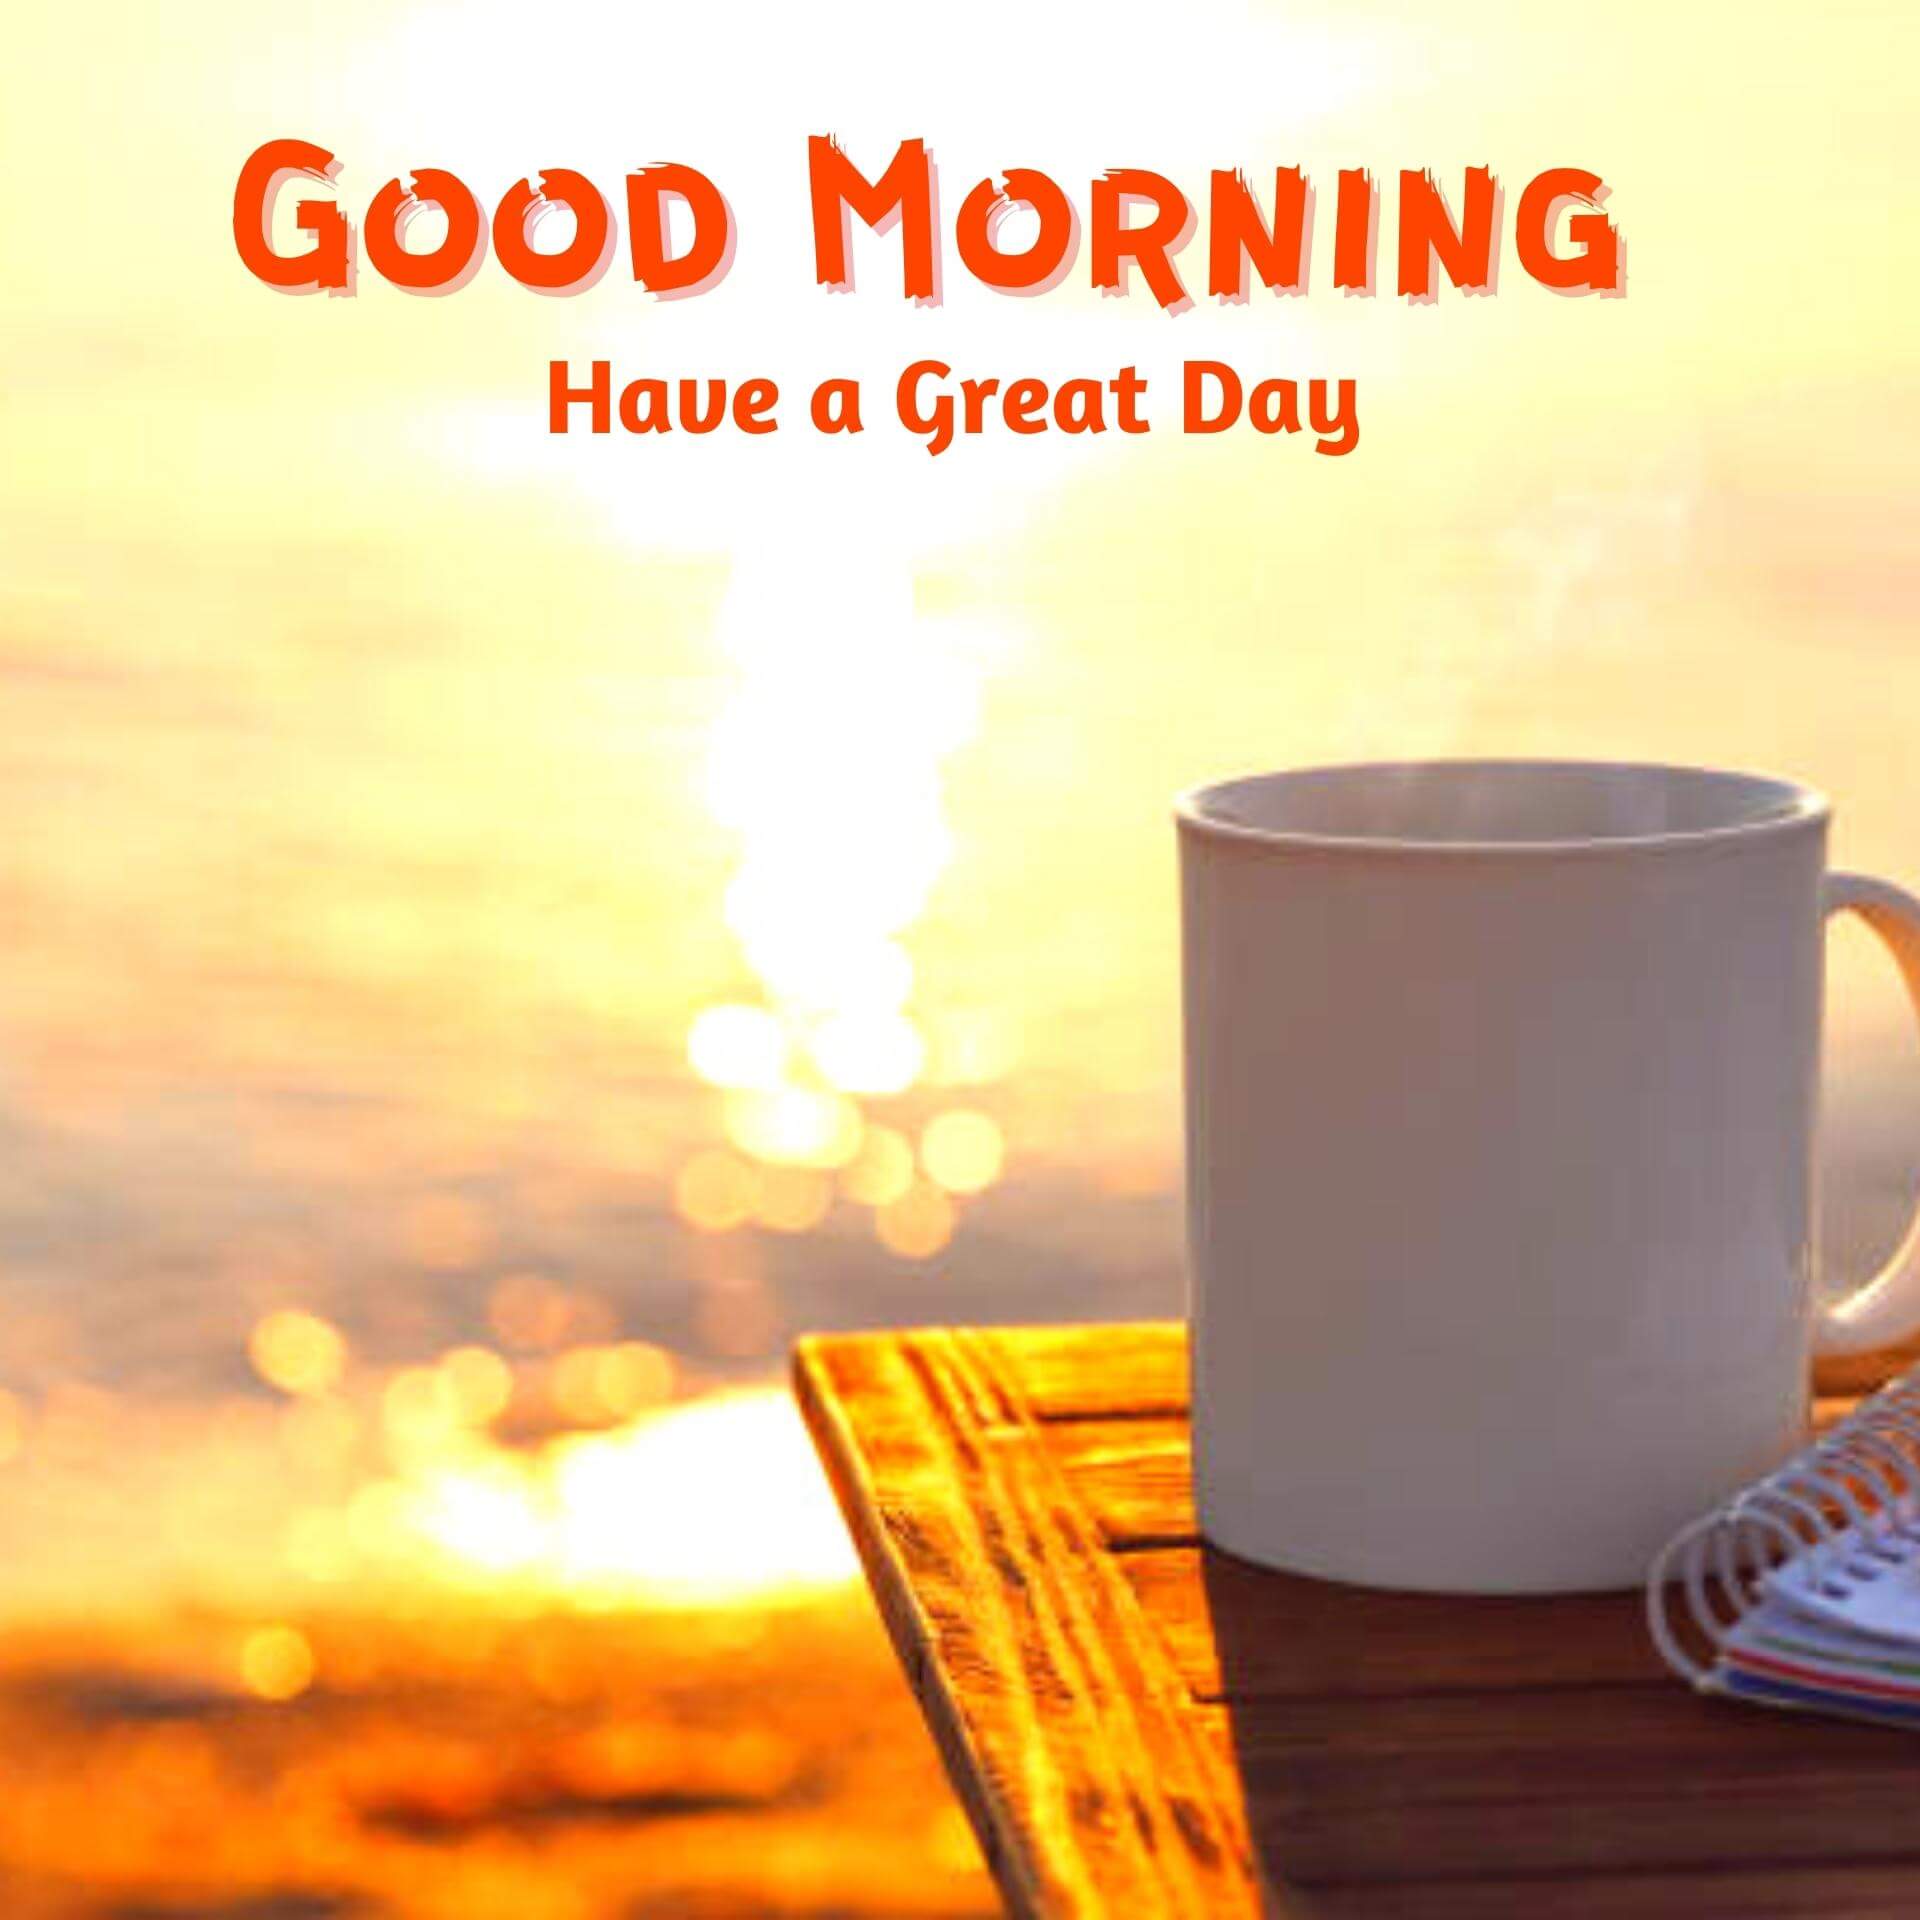 morning wishes good morning images download